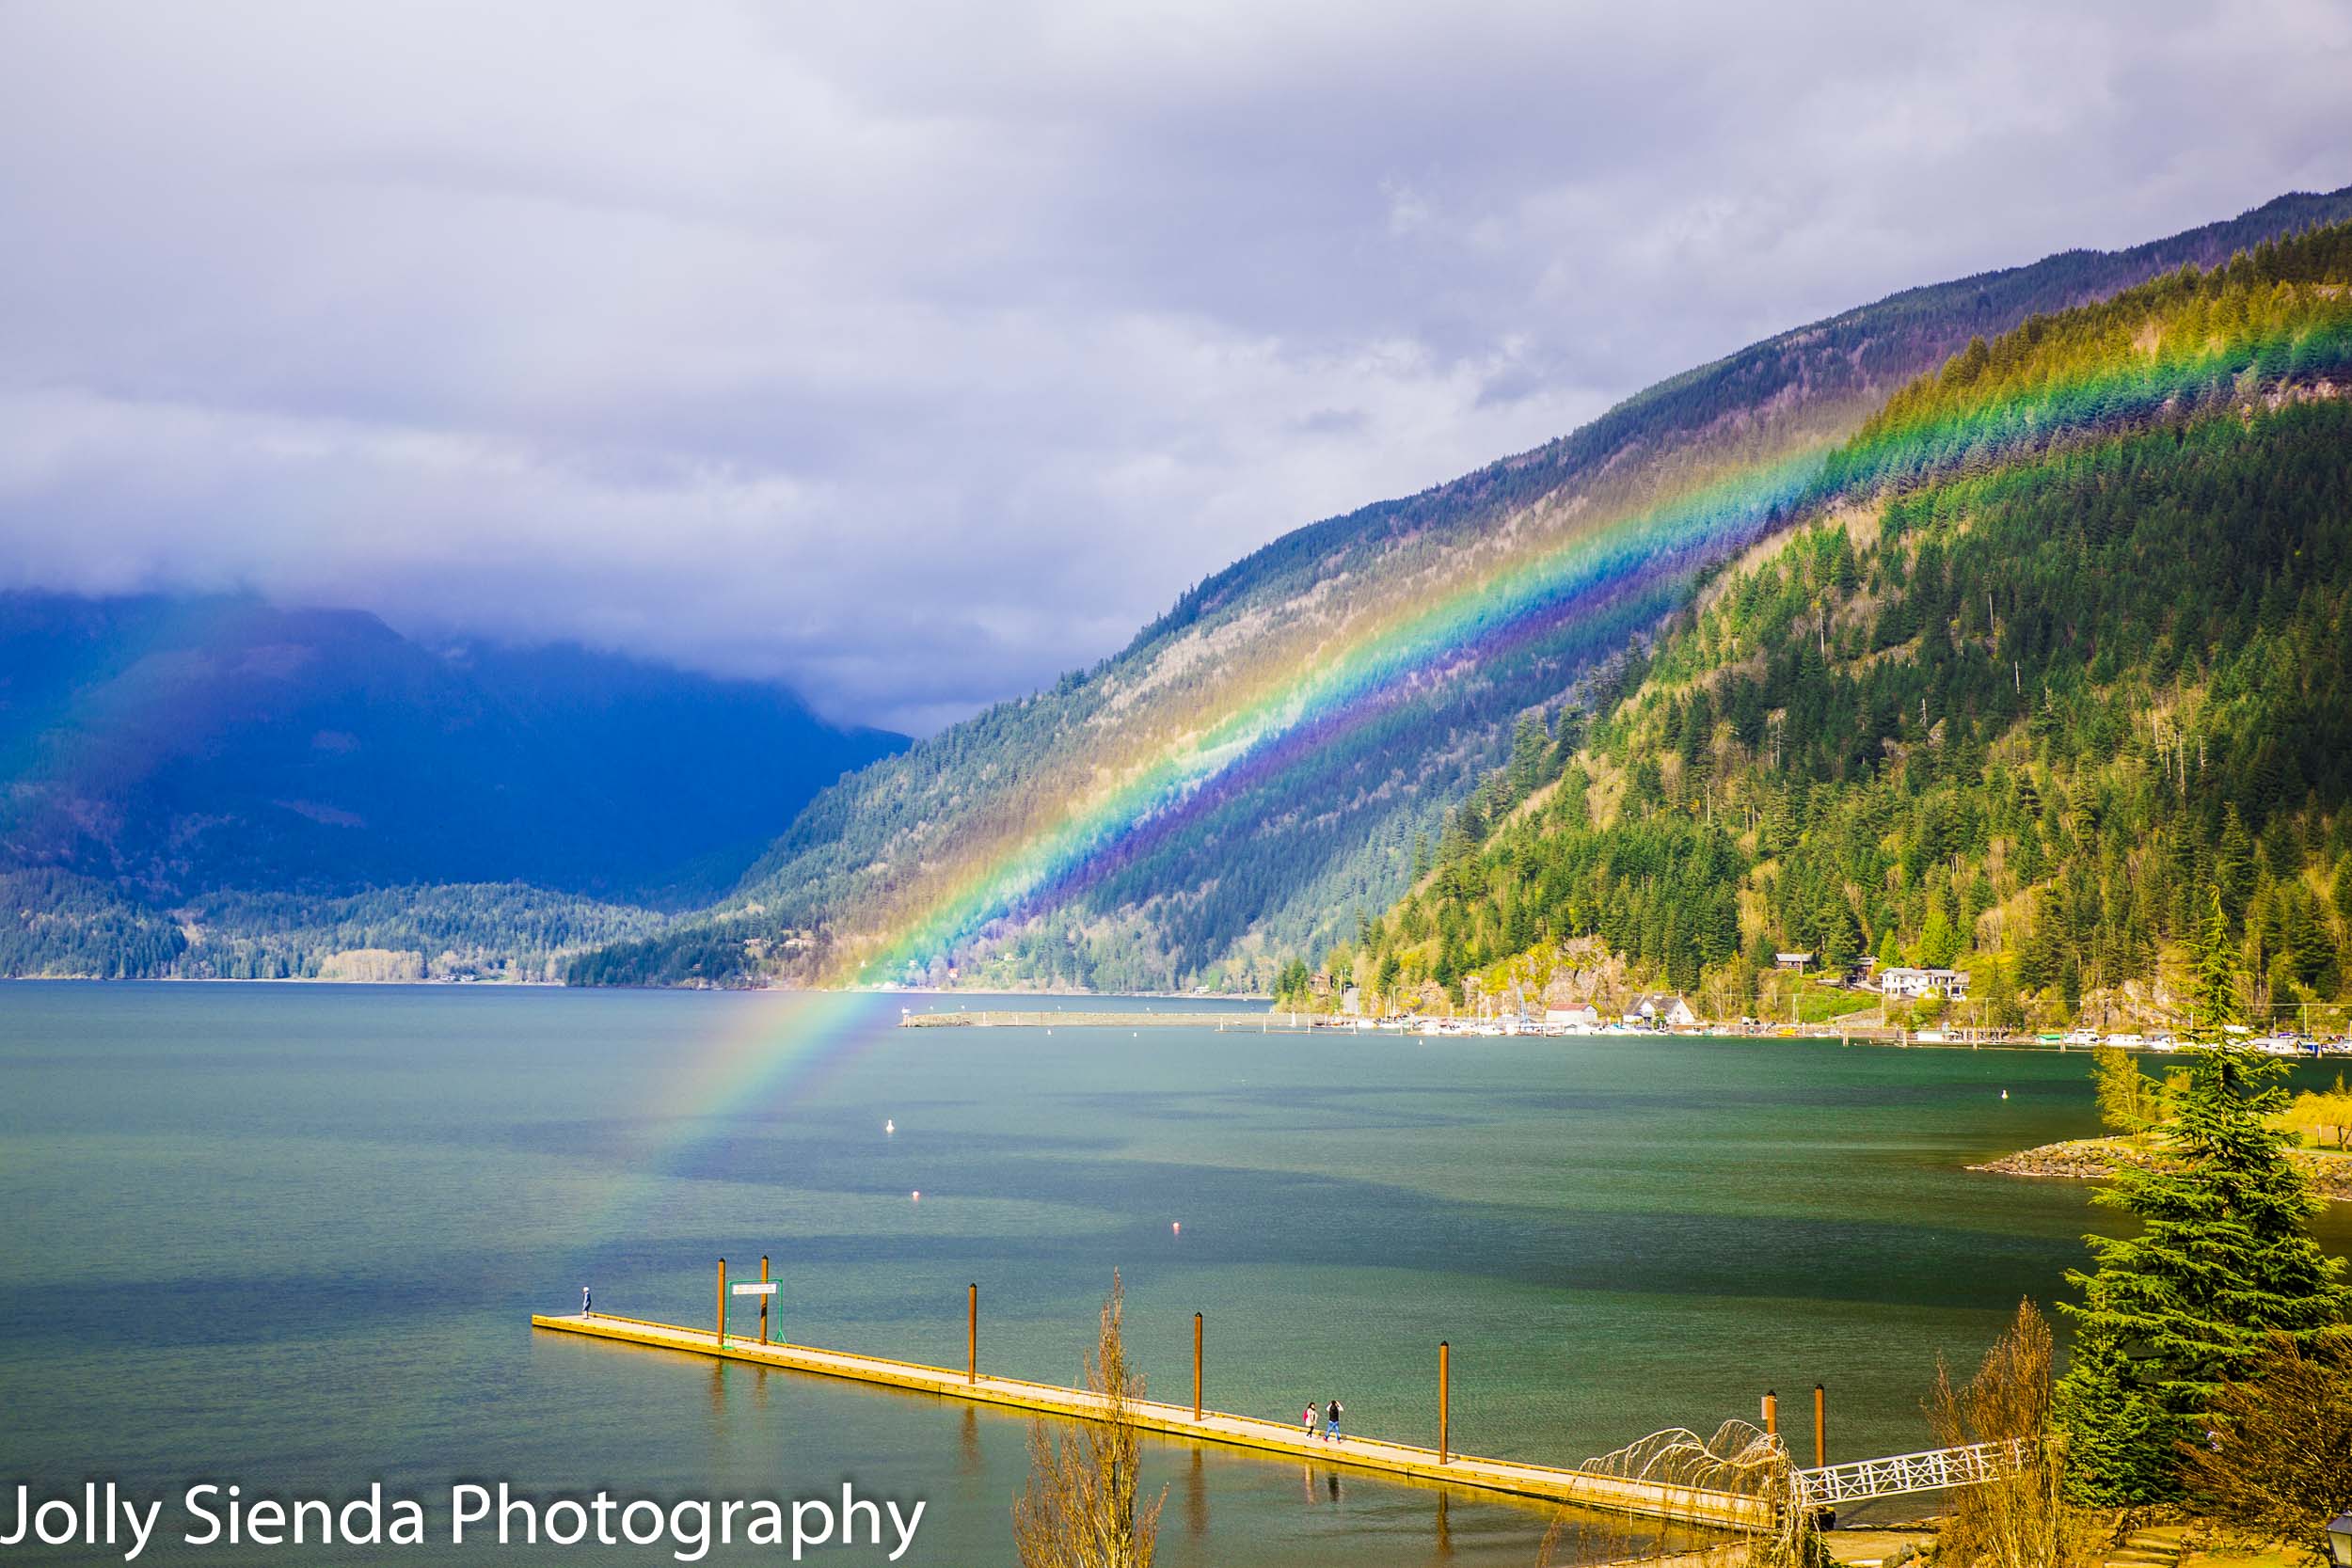 Rainbow arches over the dock and Harrison Lake